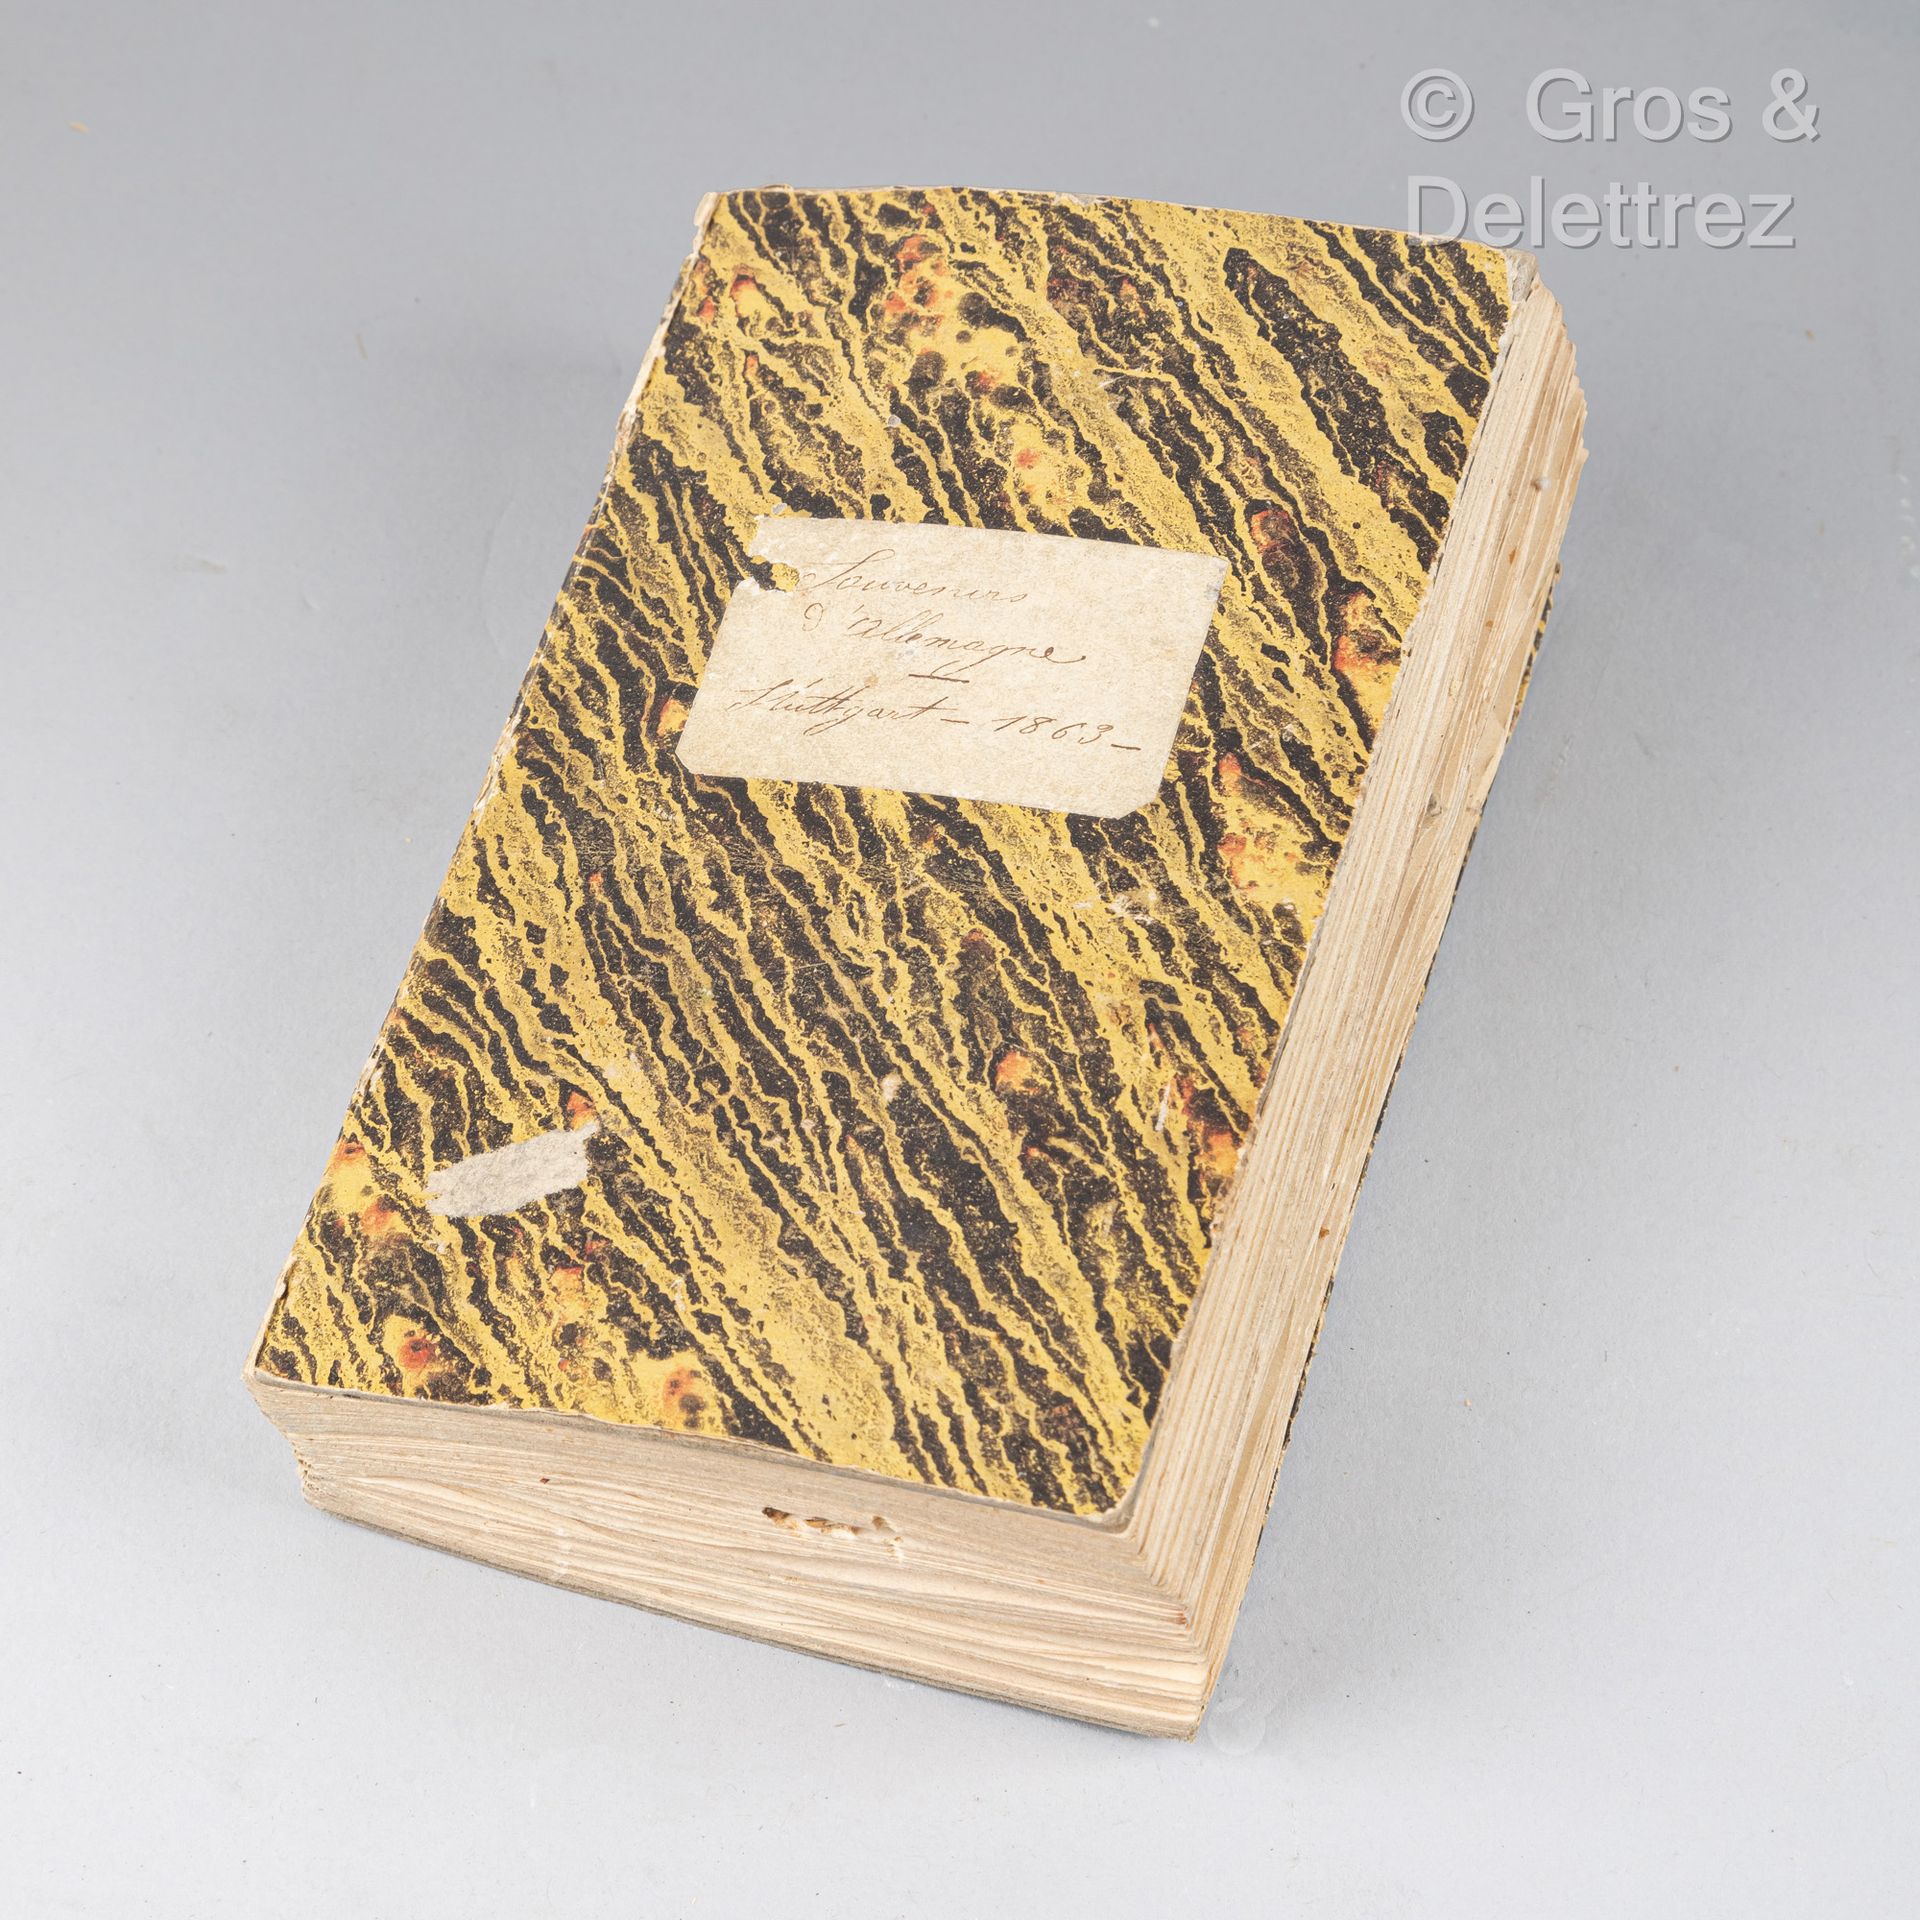 Null (SD) A. And Blanche PASSIER 

Small volume containing a manuscript "souveni&hellip;